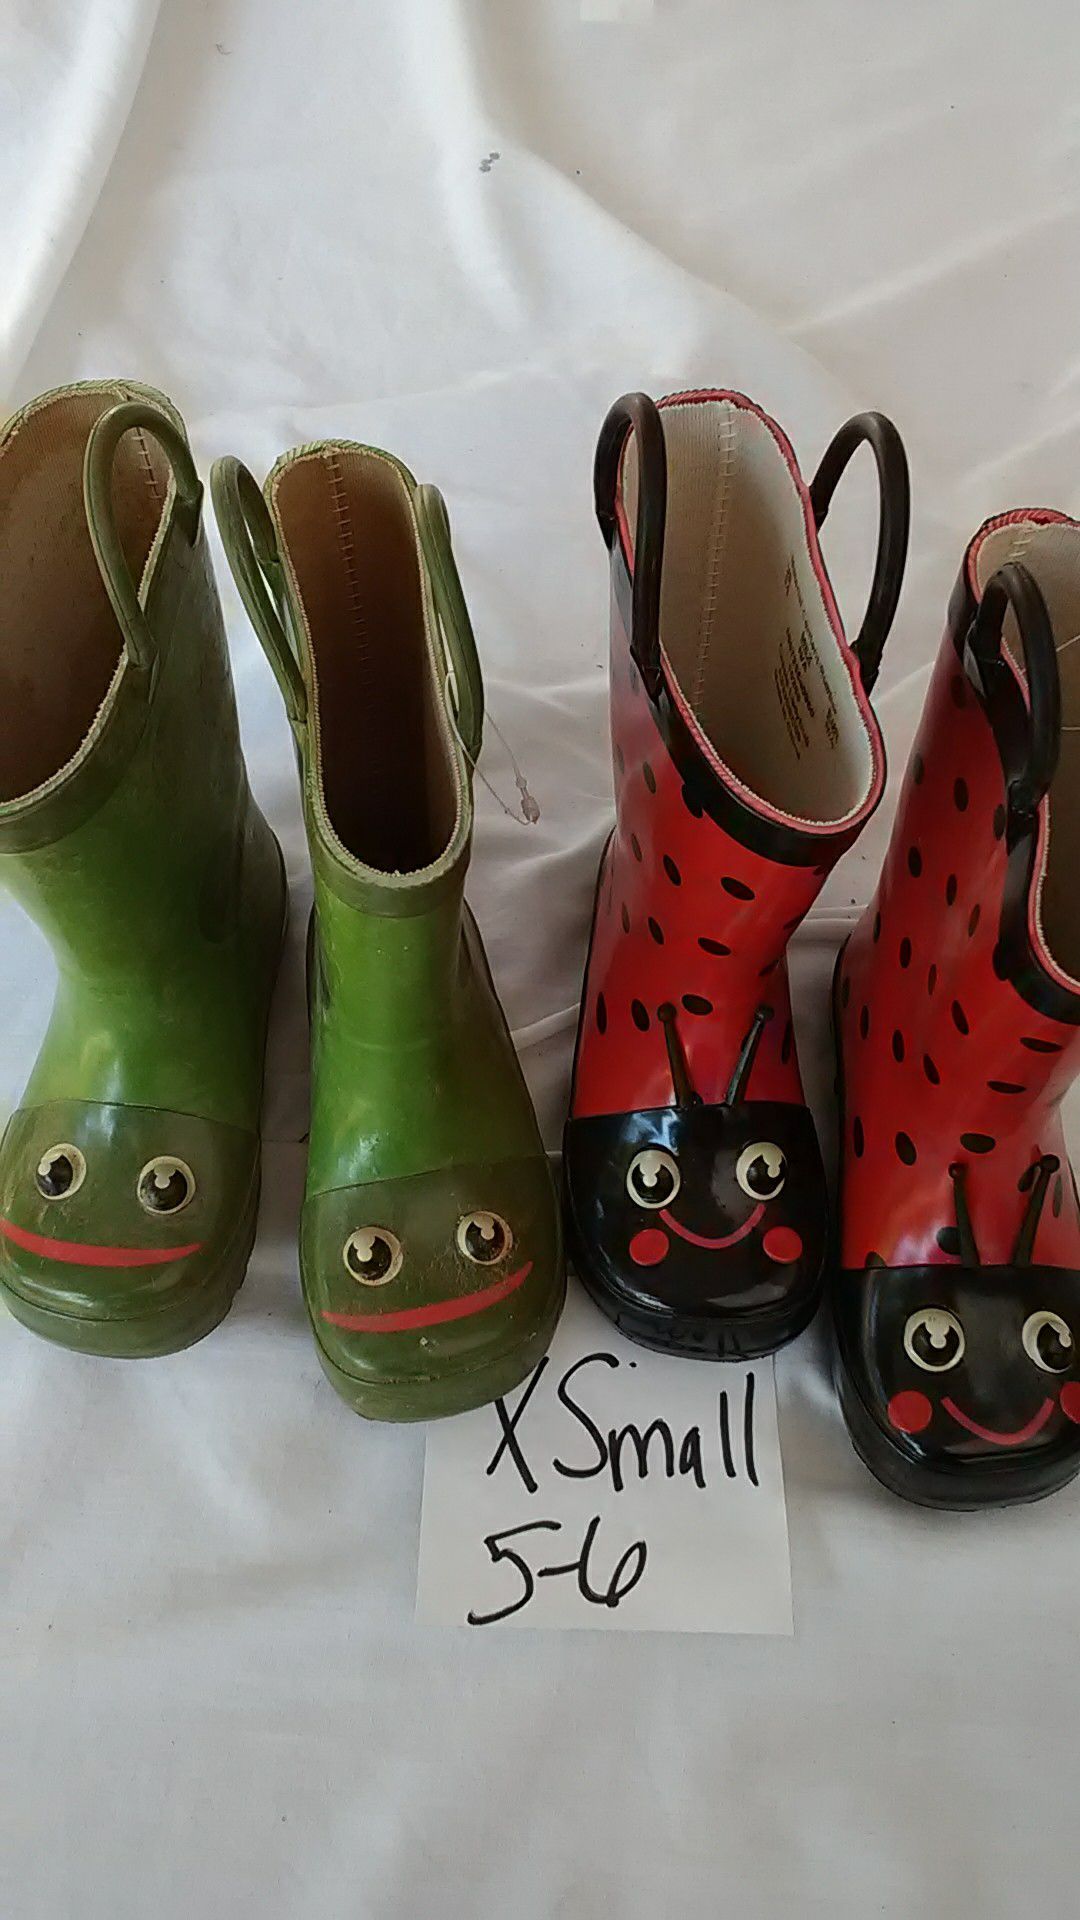 Rainy Boots Size XSmall 5/6 Frog &LadyBugg Both Played With never actually used for the rain Pre-Owned as is Take both for $5